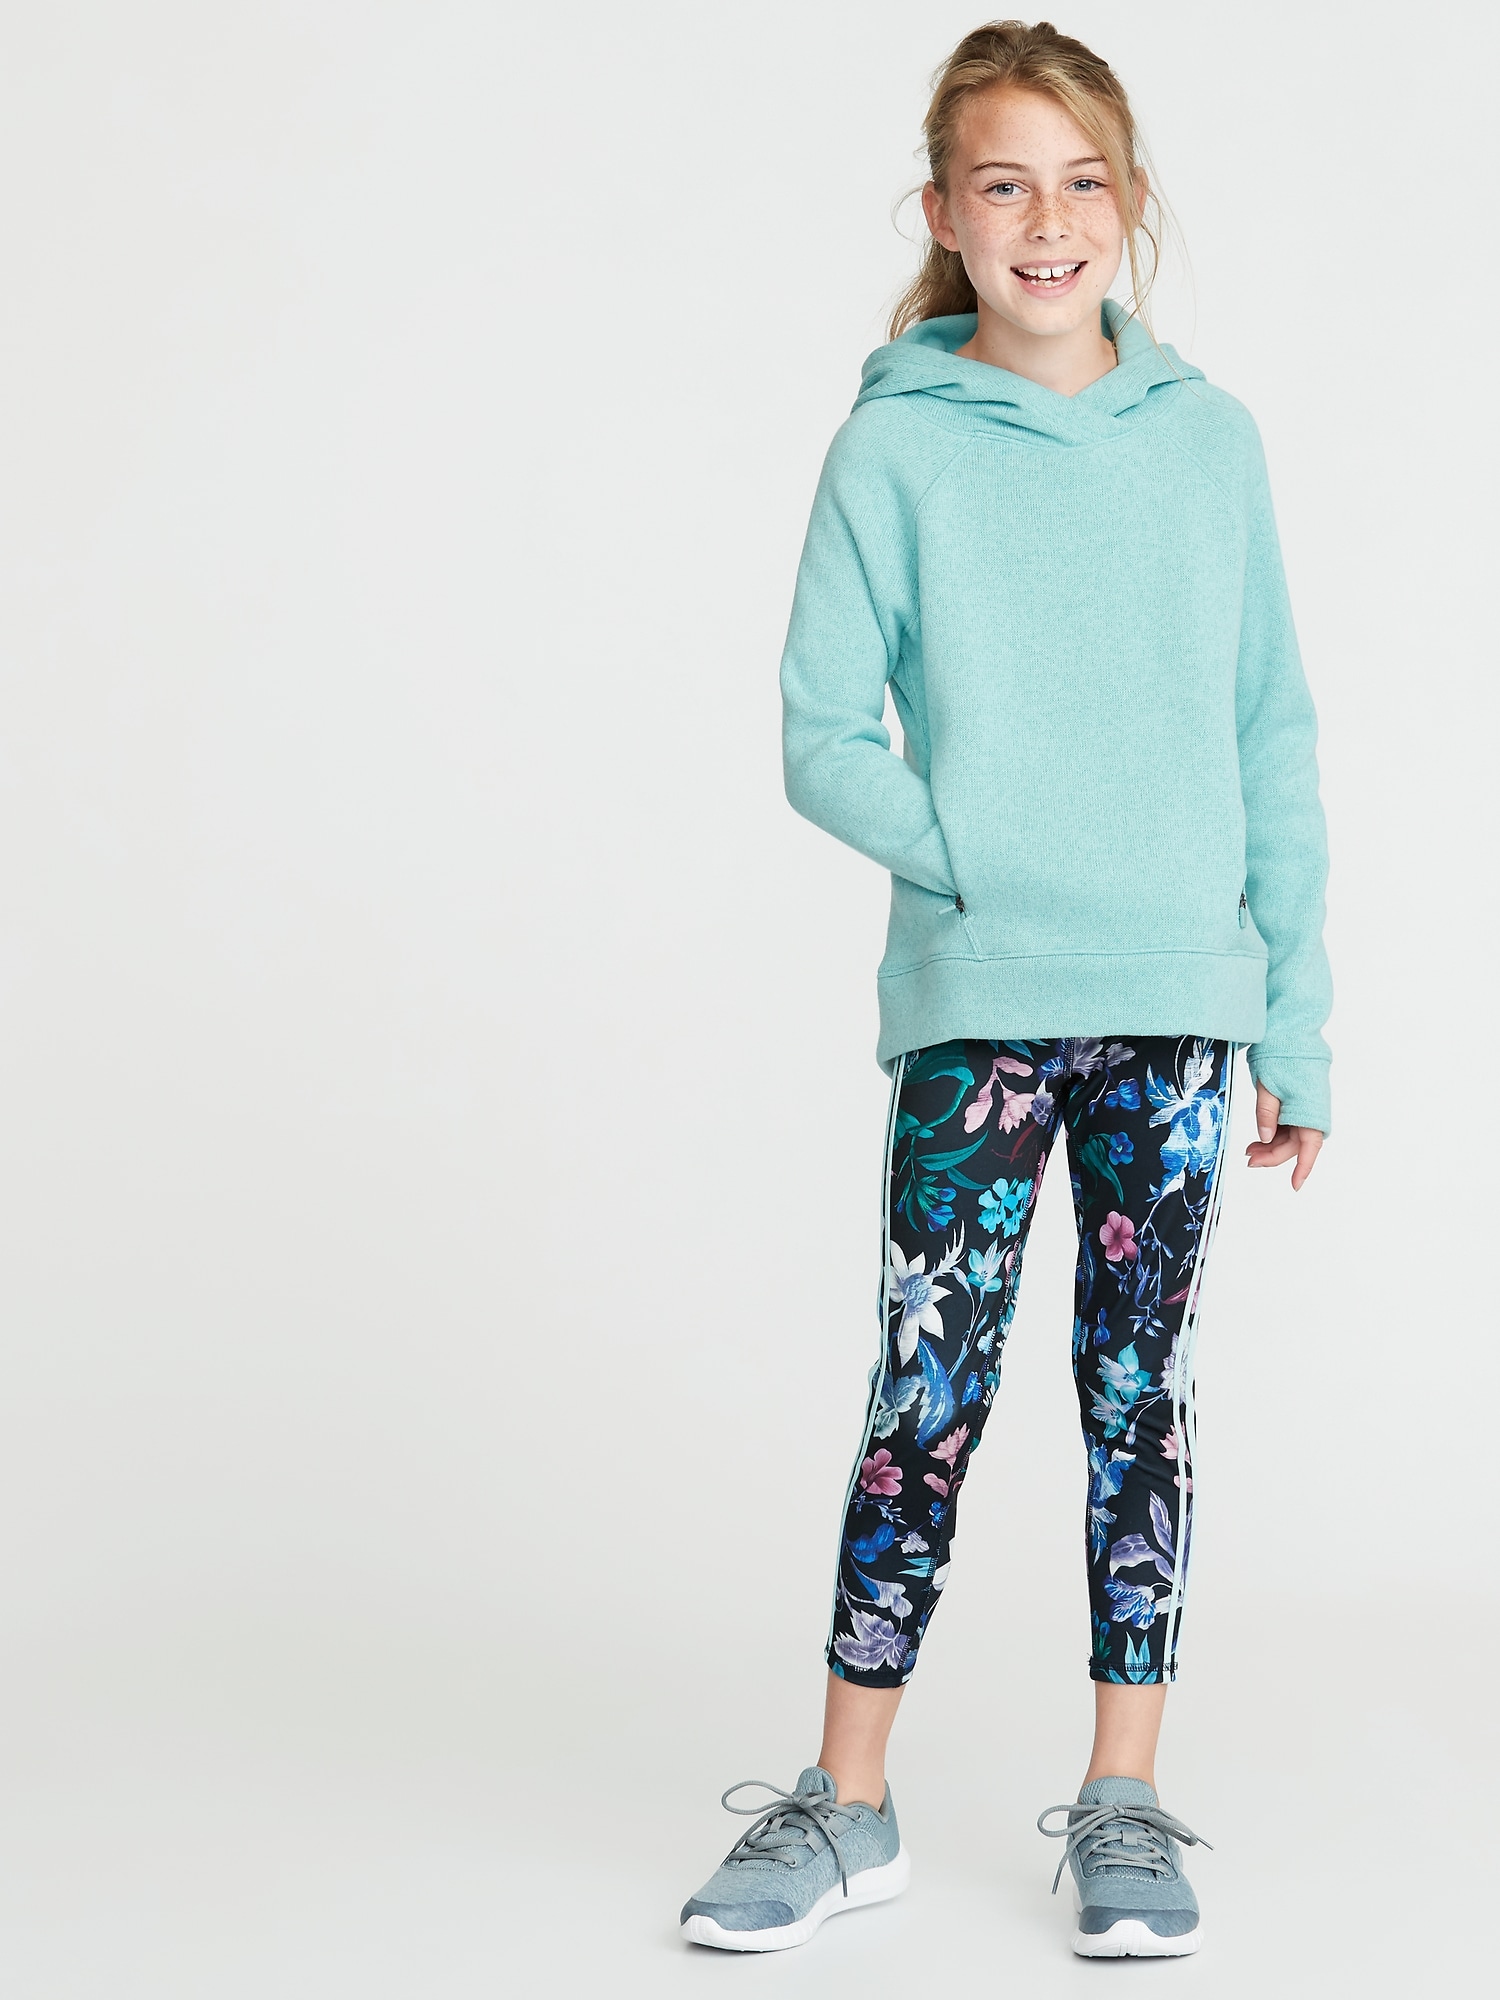 Go-Warm Relaxed Sweater-Knit Hoodie for Girls | Old Navy